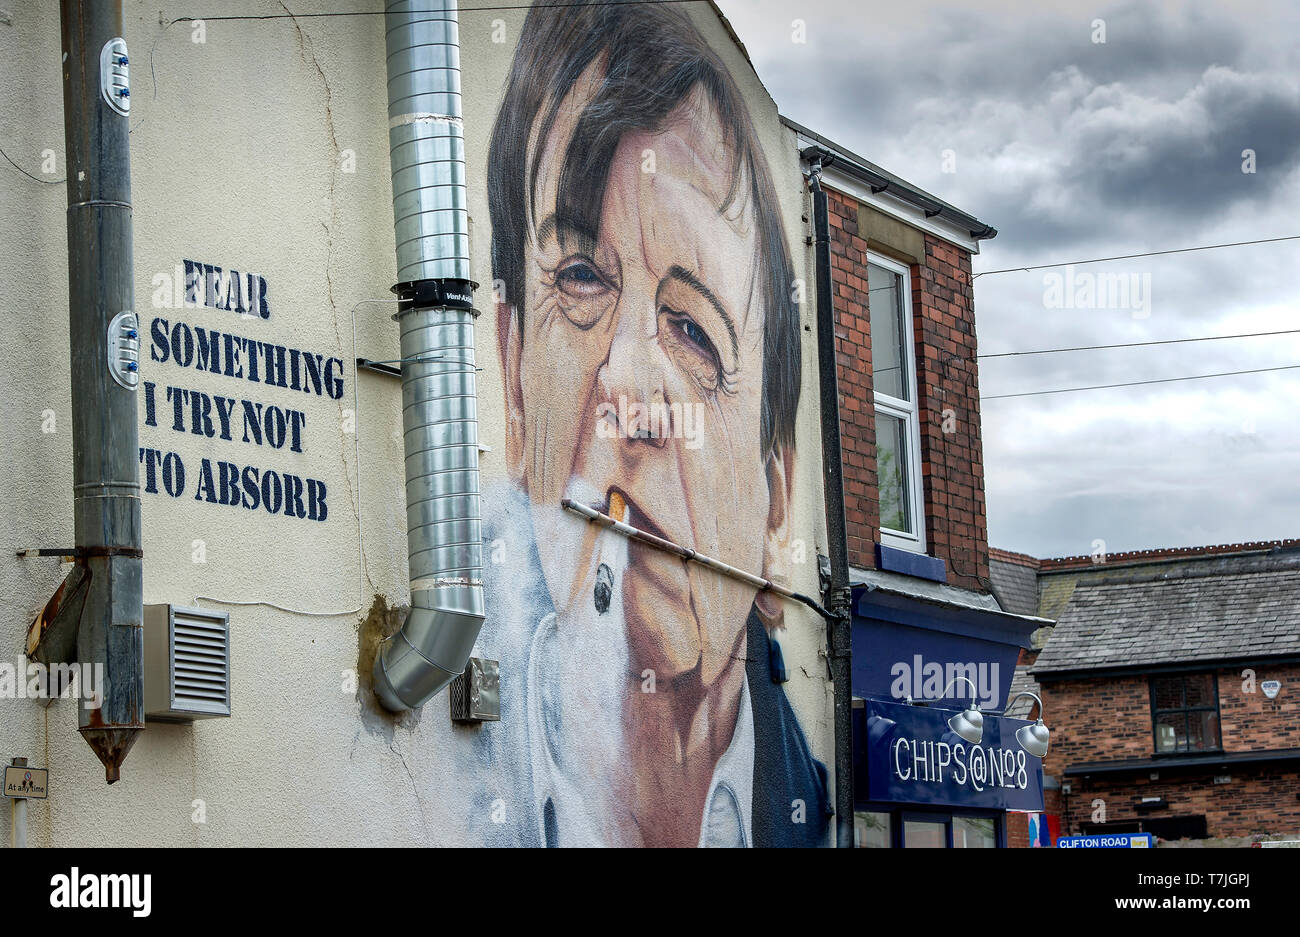 Mural of legendary Prestwich, Manchester singer and songwriter Mark E Smith of the group The Fall, on the wall of the Chips@No8 fish and chip shop in  Stock Photo